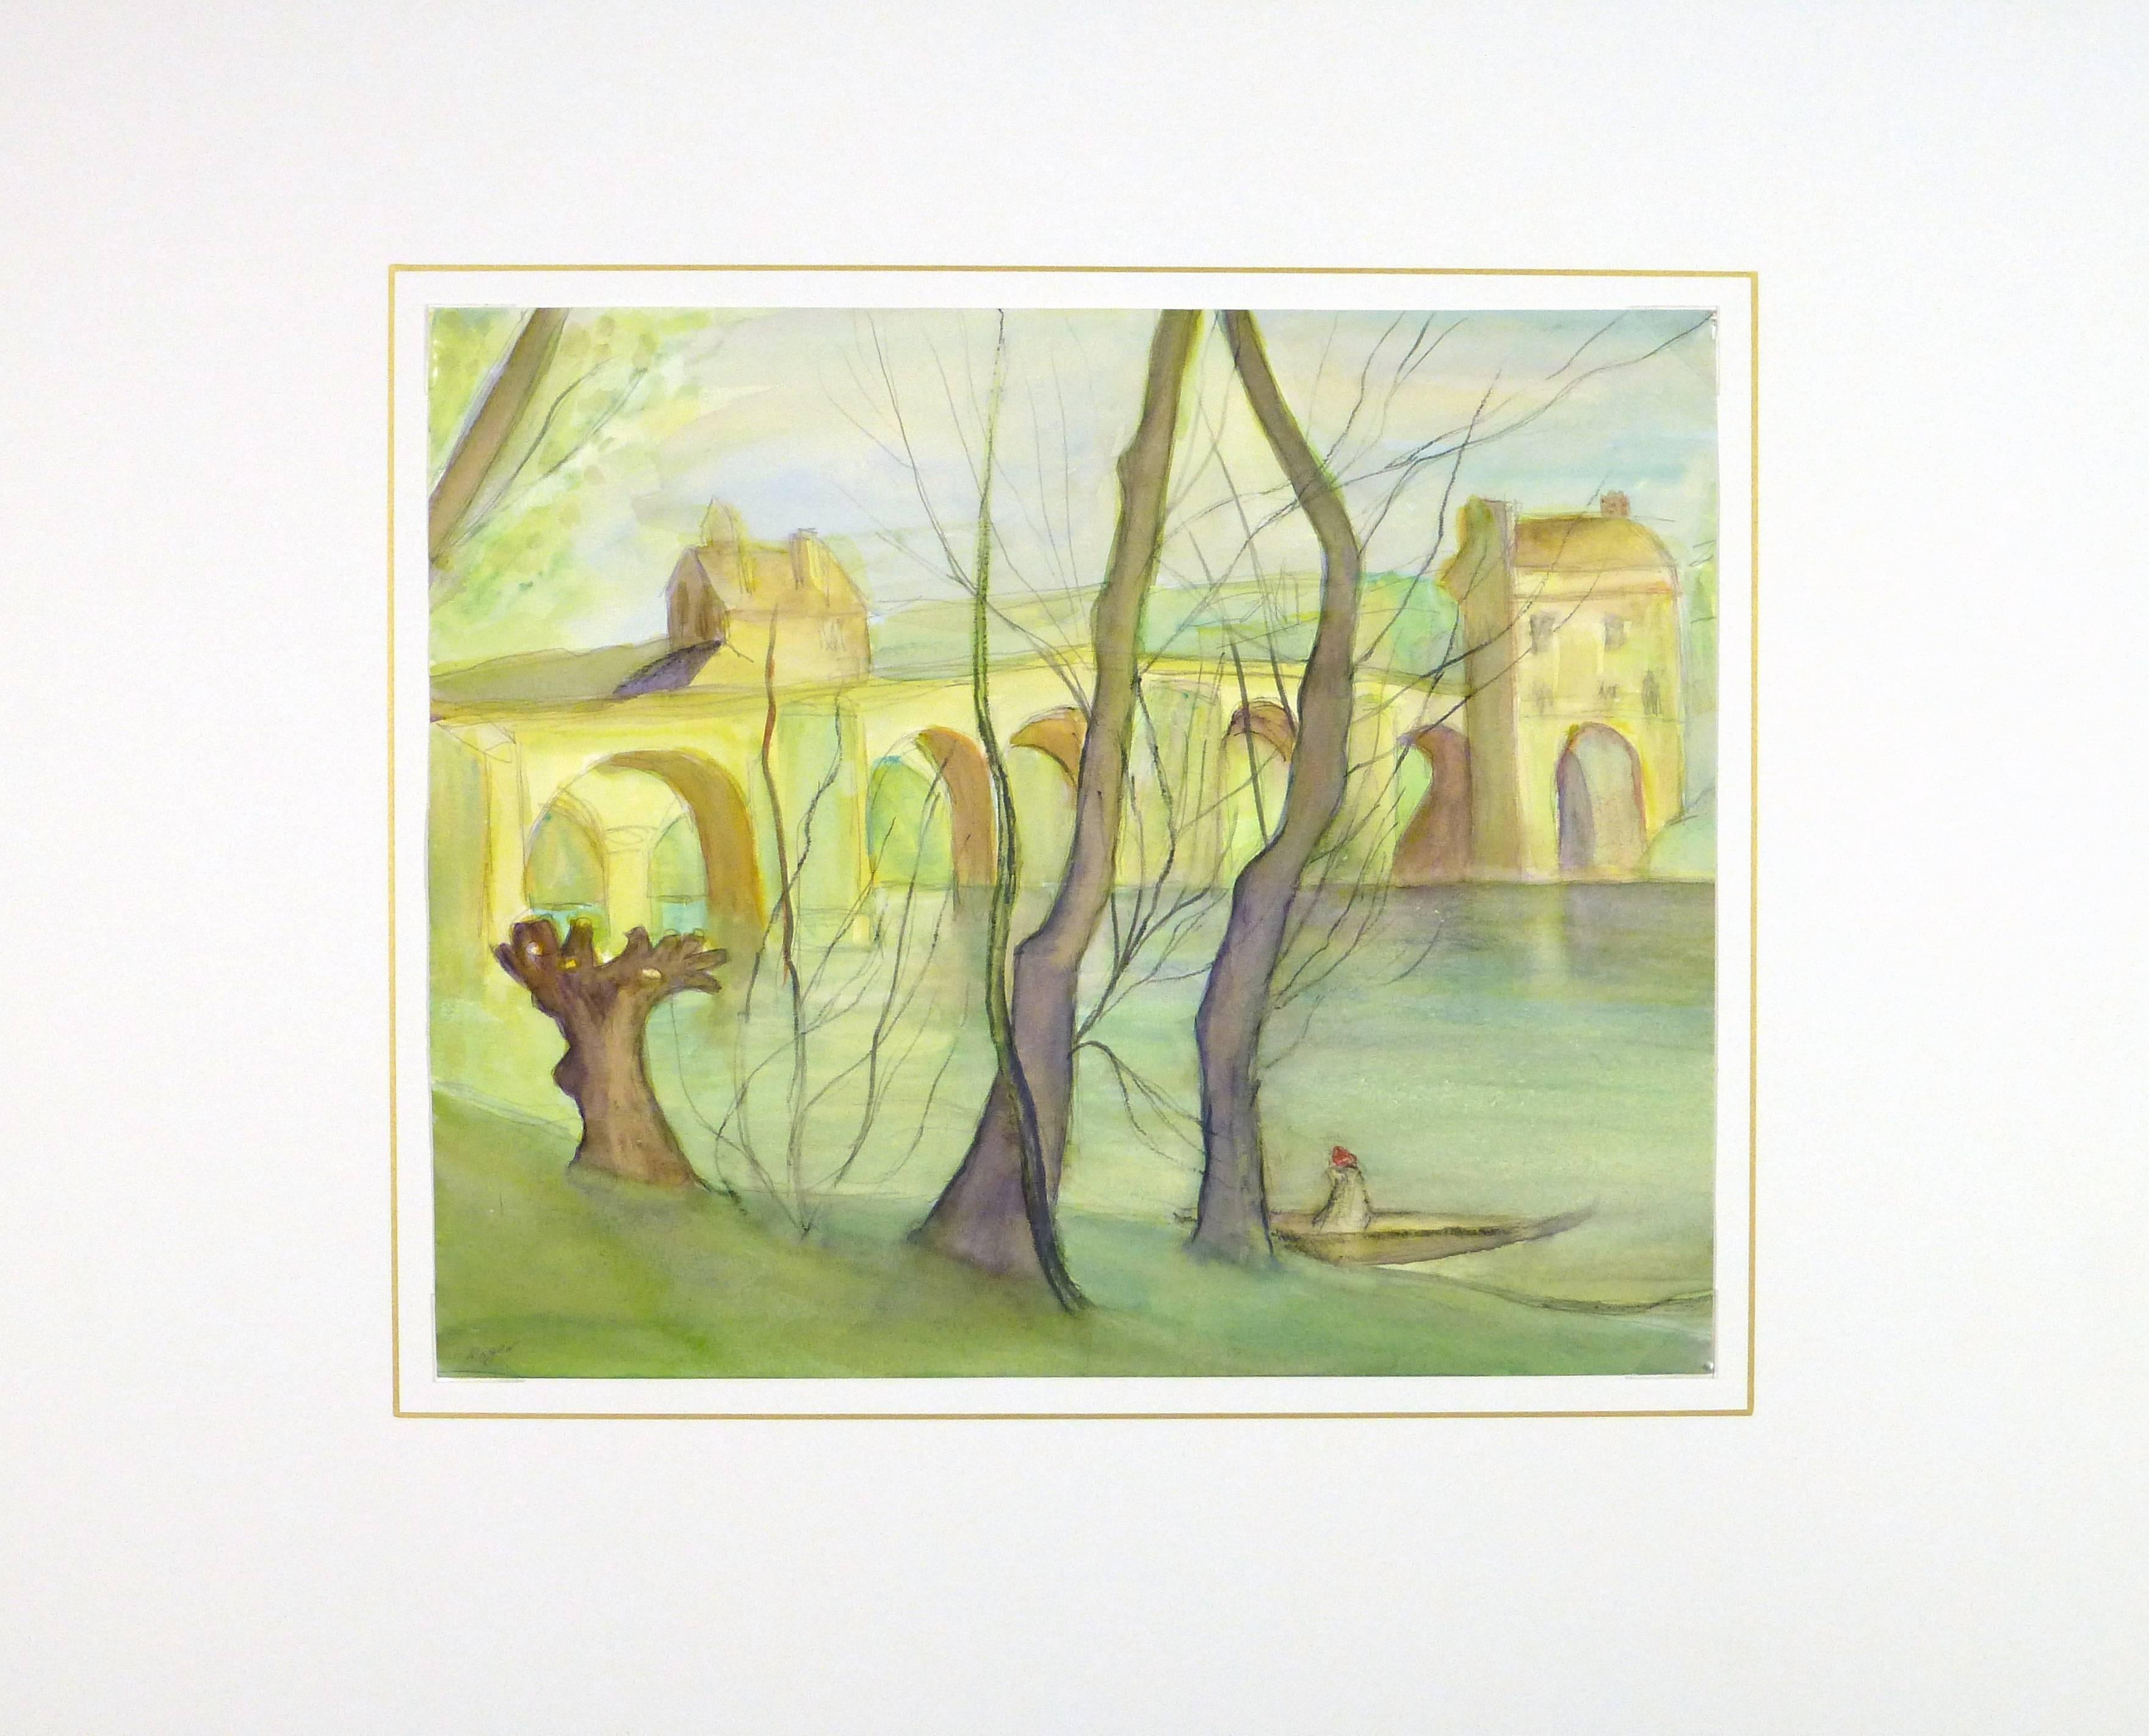 A quiet bridge arches over the Loire in this soothing watercolor depicting a scene from France's beloved Loire River Valley, c. 1960. Blended greens and yellows add a softness to the painting, while the viewer's eyes follow an almost-circular path